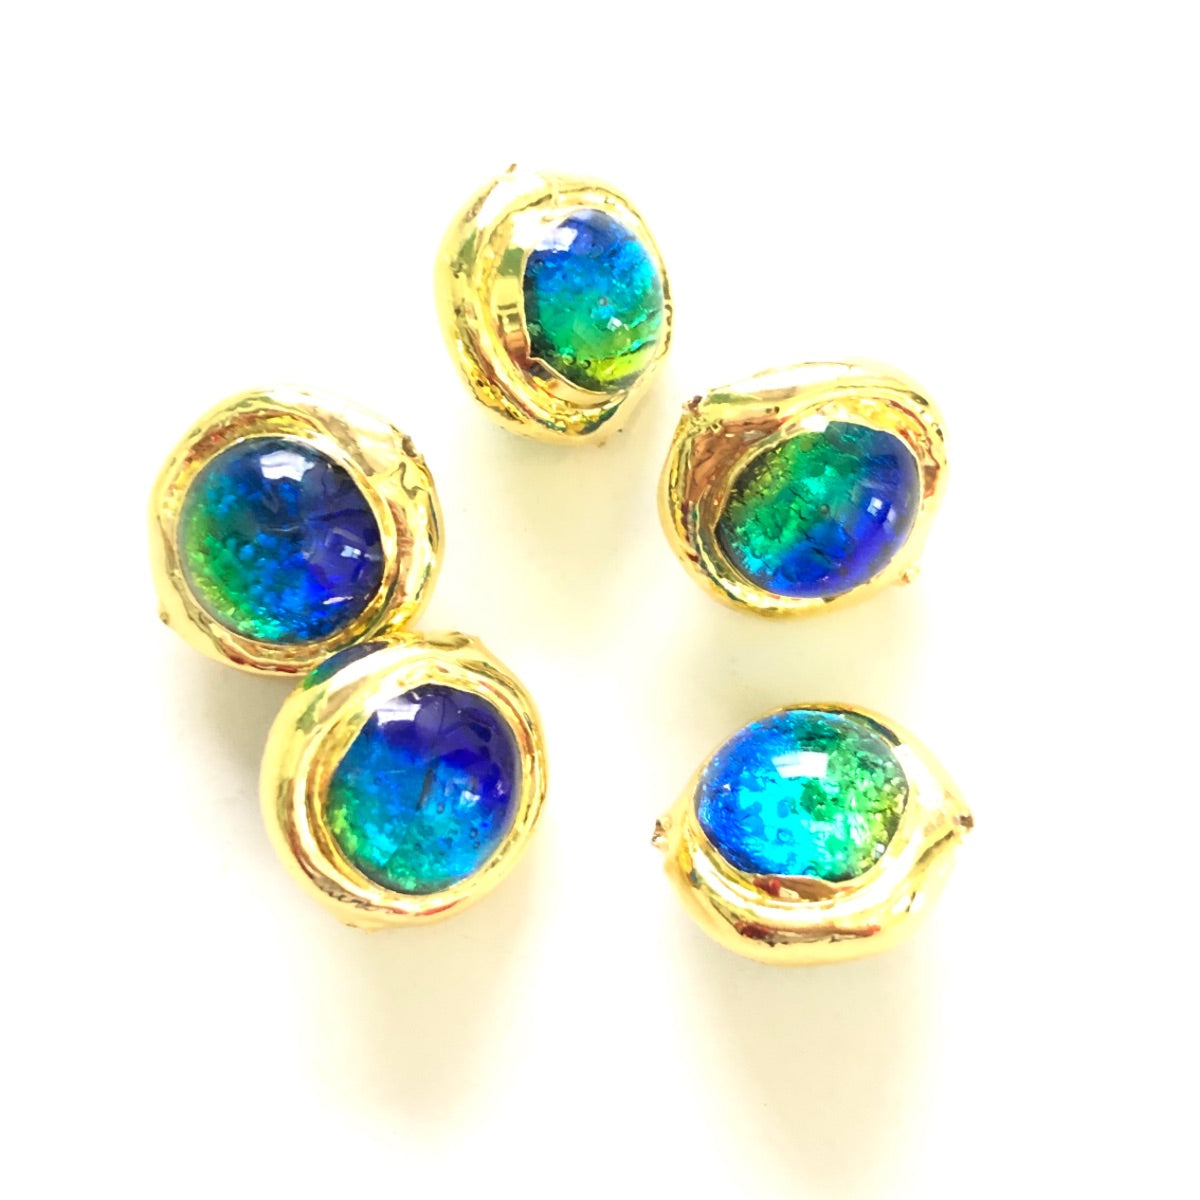 2-5-10pcs/lot 17*16mm Gold Plated Green Blue Colored Glaze Spacers Focal Beads Focal Beads Focal Beads Charms Beads Beyond